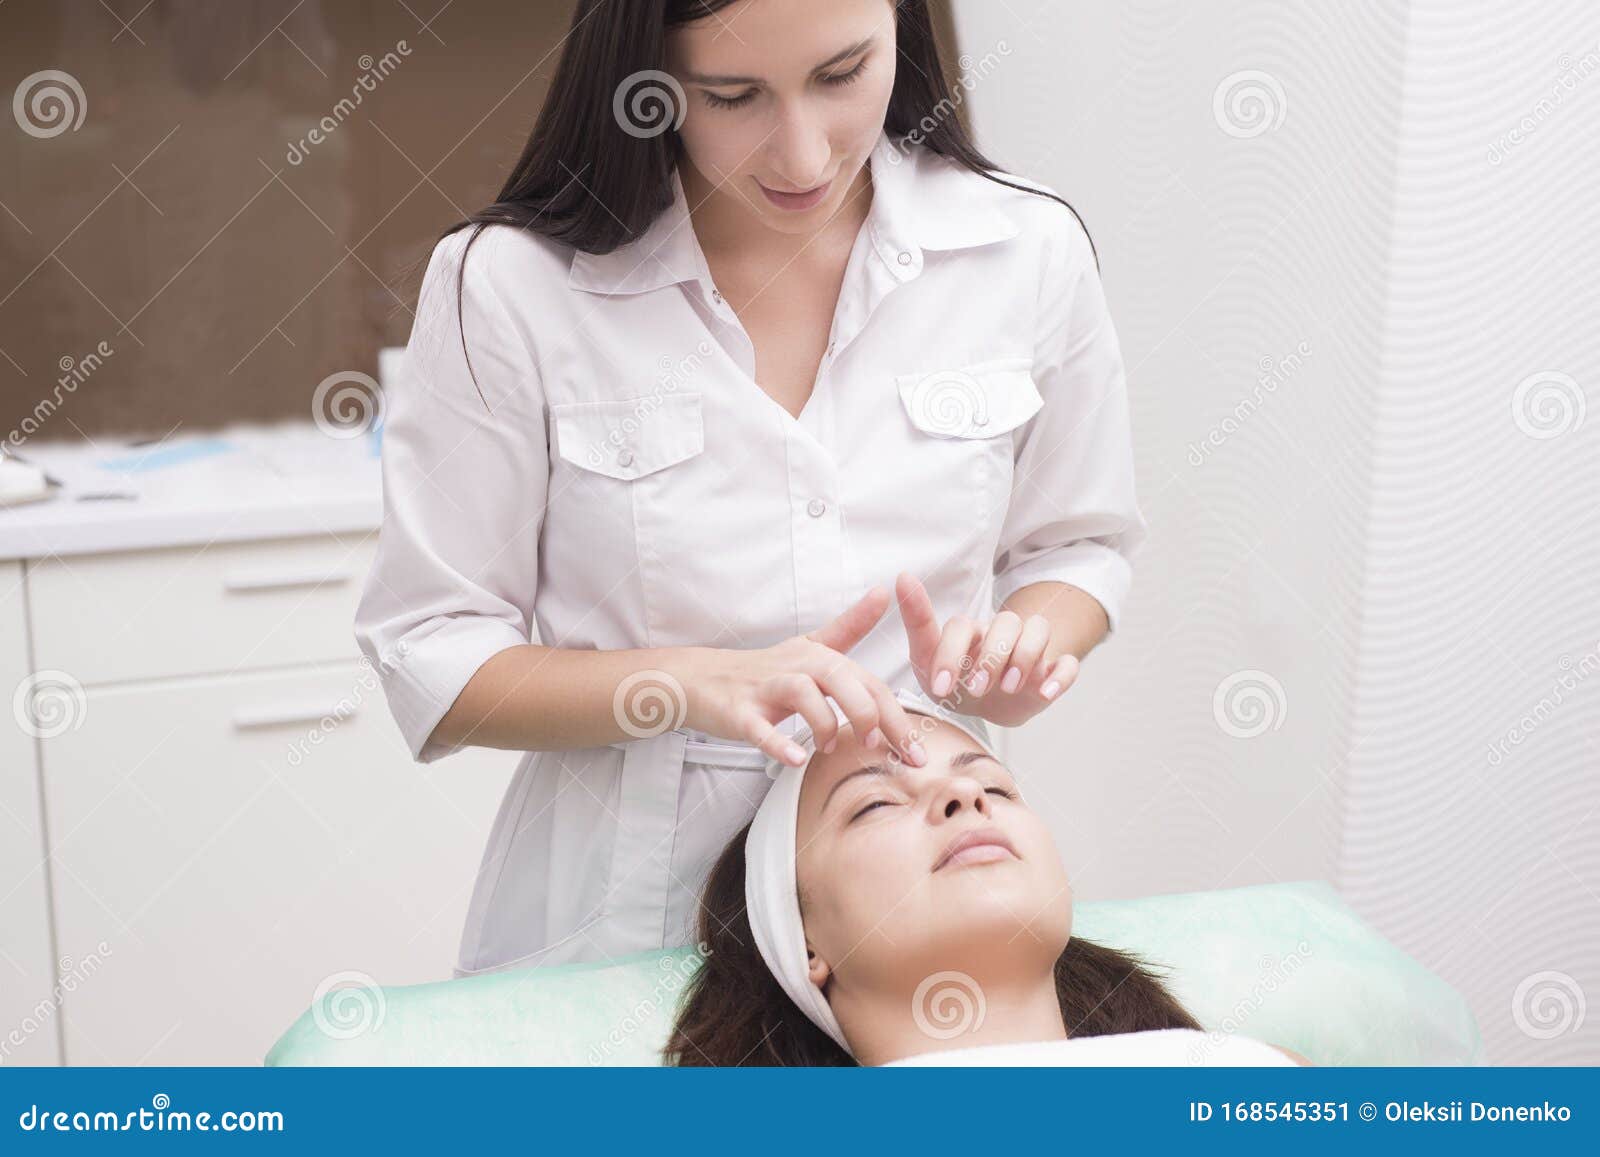 Girl Massage Therapist Does Facial Massage With A Beautiful Woman Hands Are Closing Stock Image